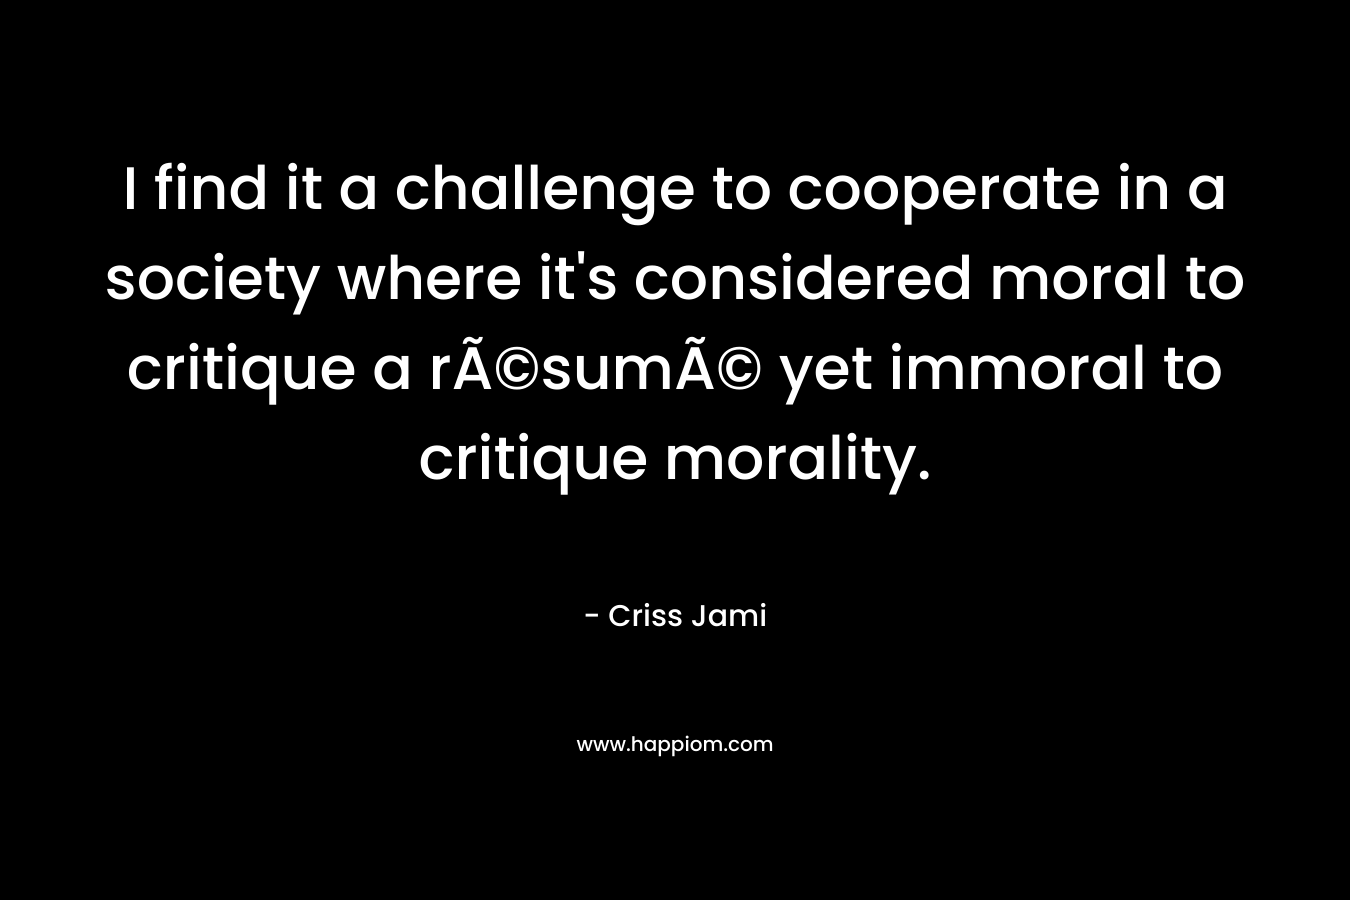 I find it a challenge to cooperate in a society where it's considered moral to critique a rÃ©sumÃ© yet immoral to critique morality.